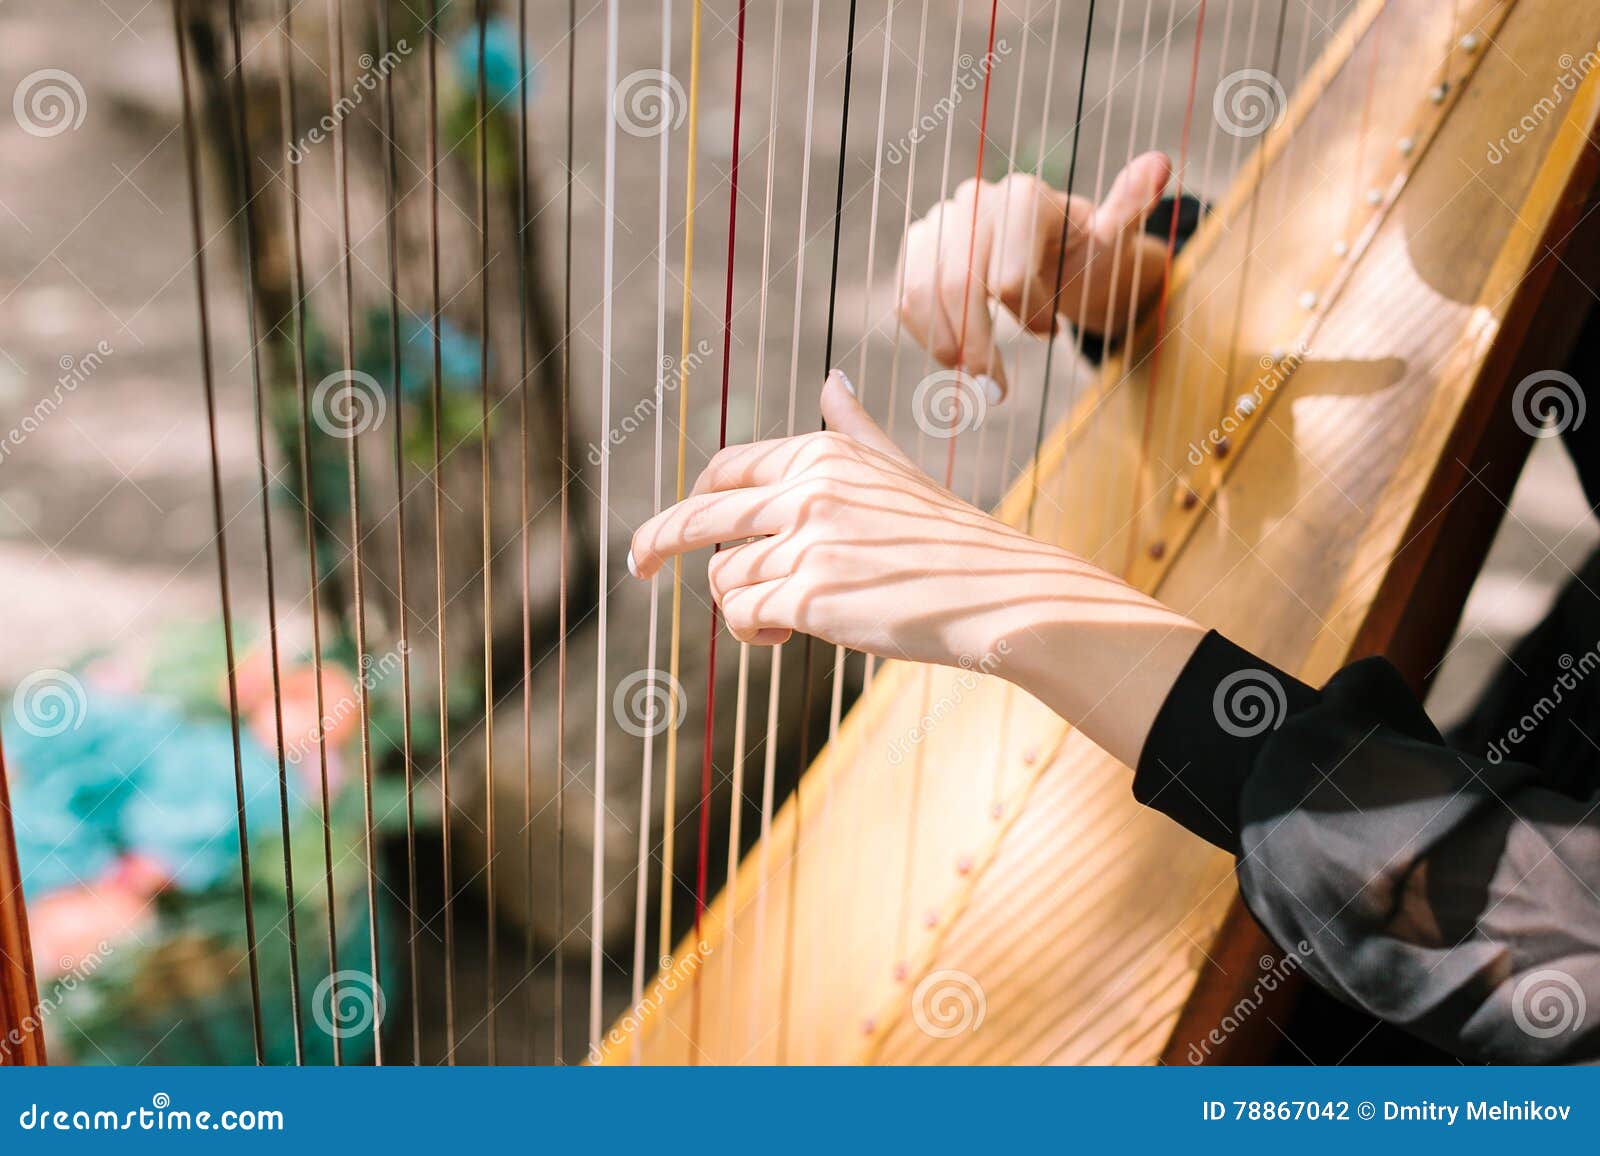 hands of the woman playing a harp. symphonic orchestra. harpist